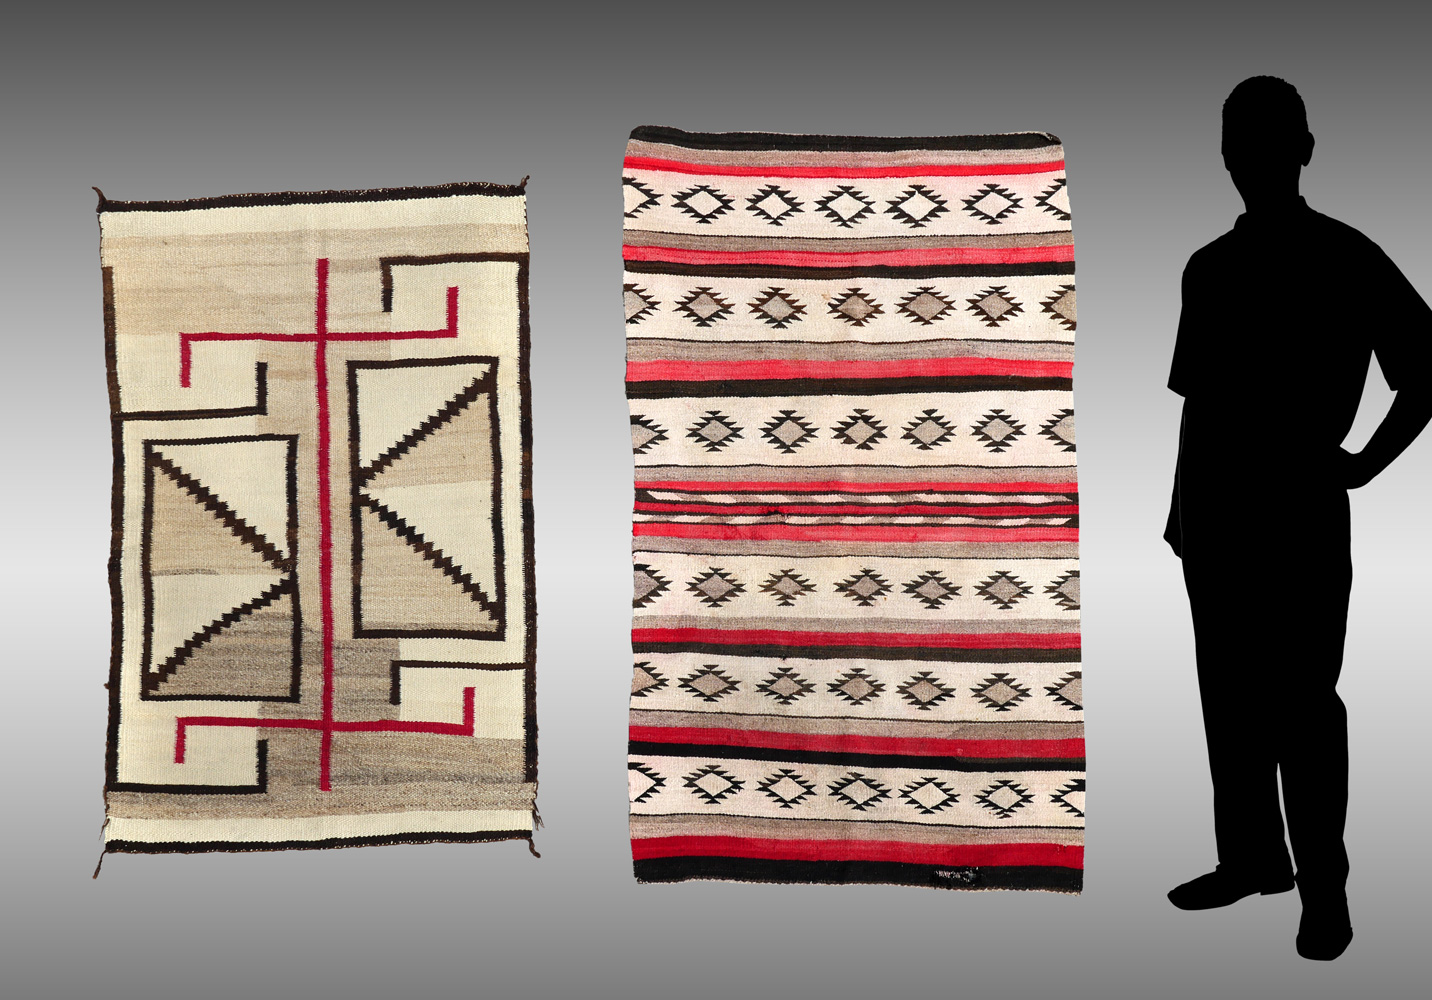 2 AMERICAN INDIAN WOVEN BLANKETS: